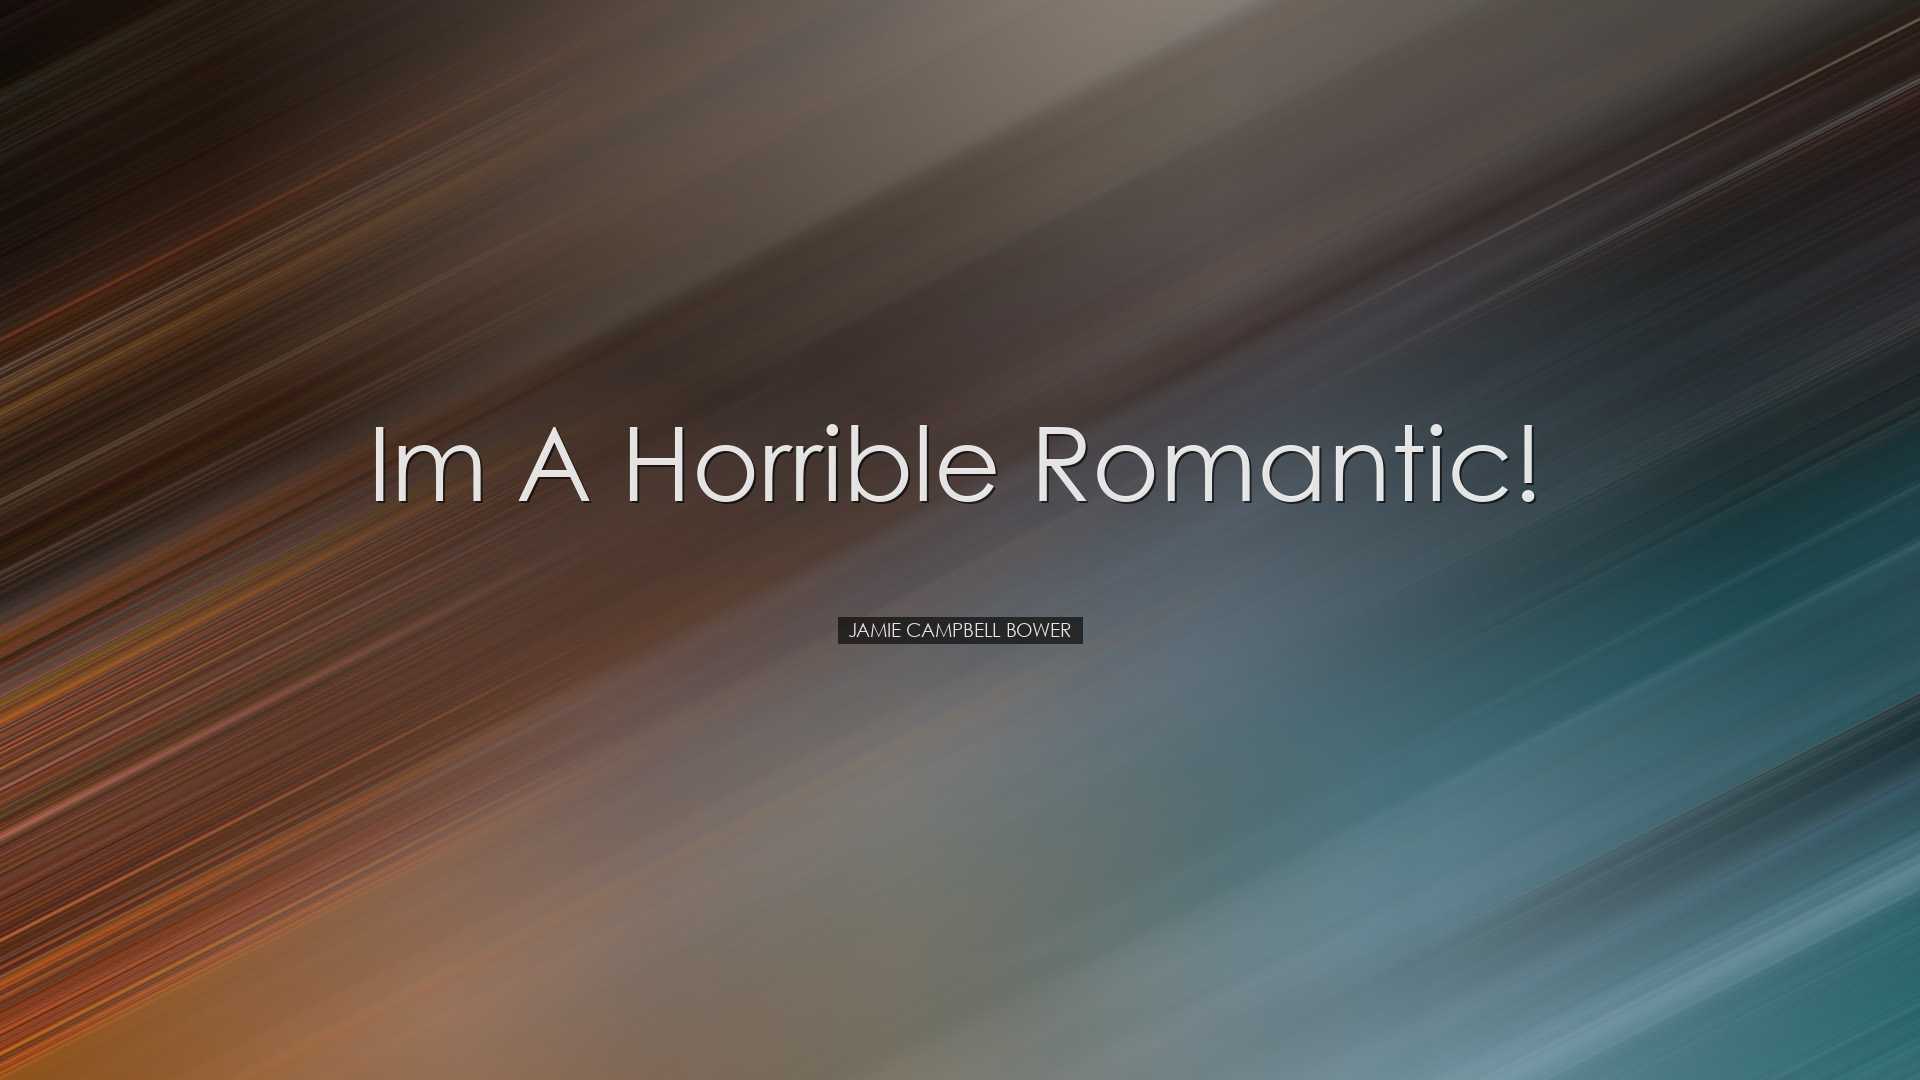 Im a horrible romantic! - Jamie Campbell Bower